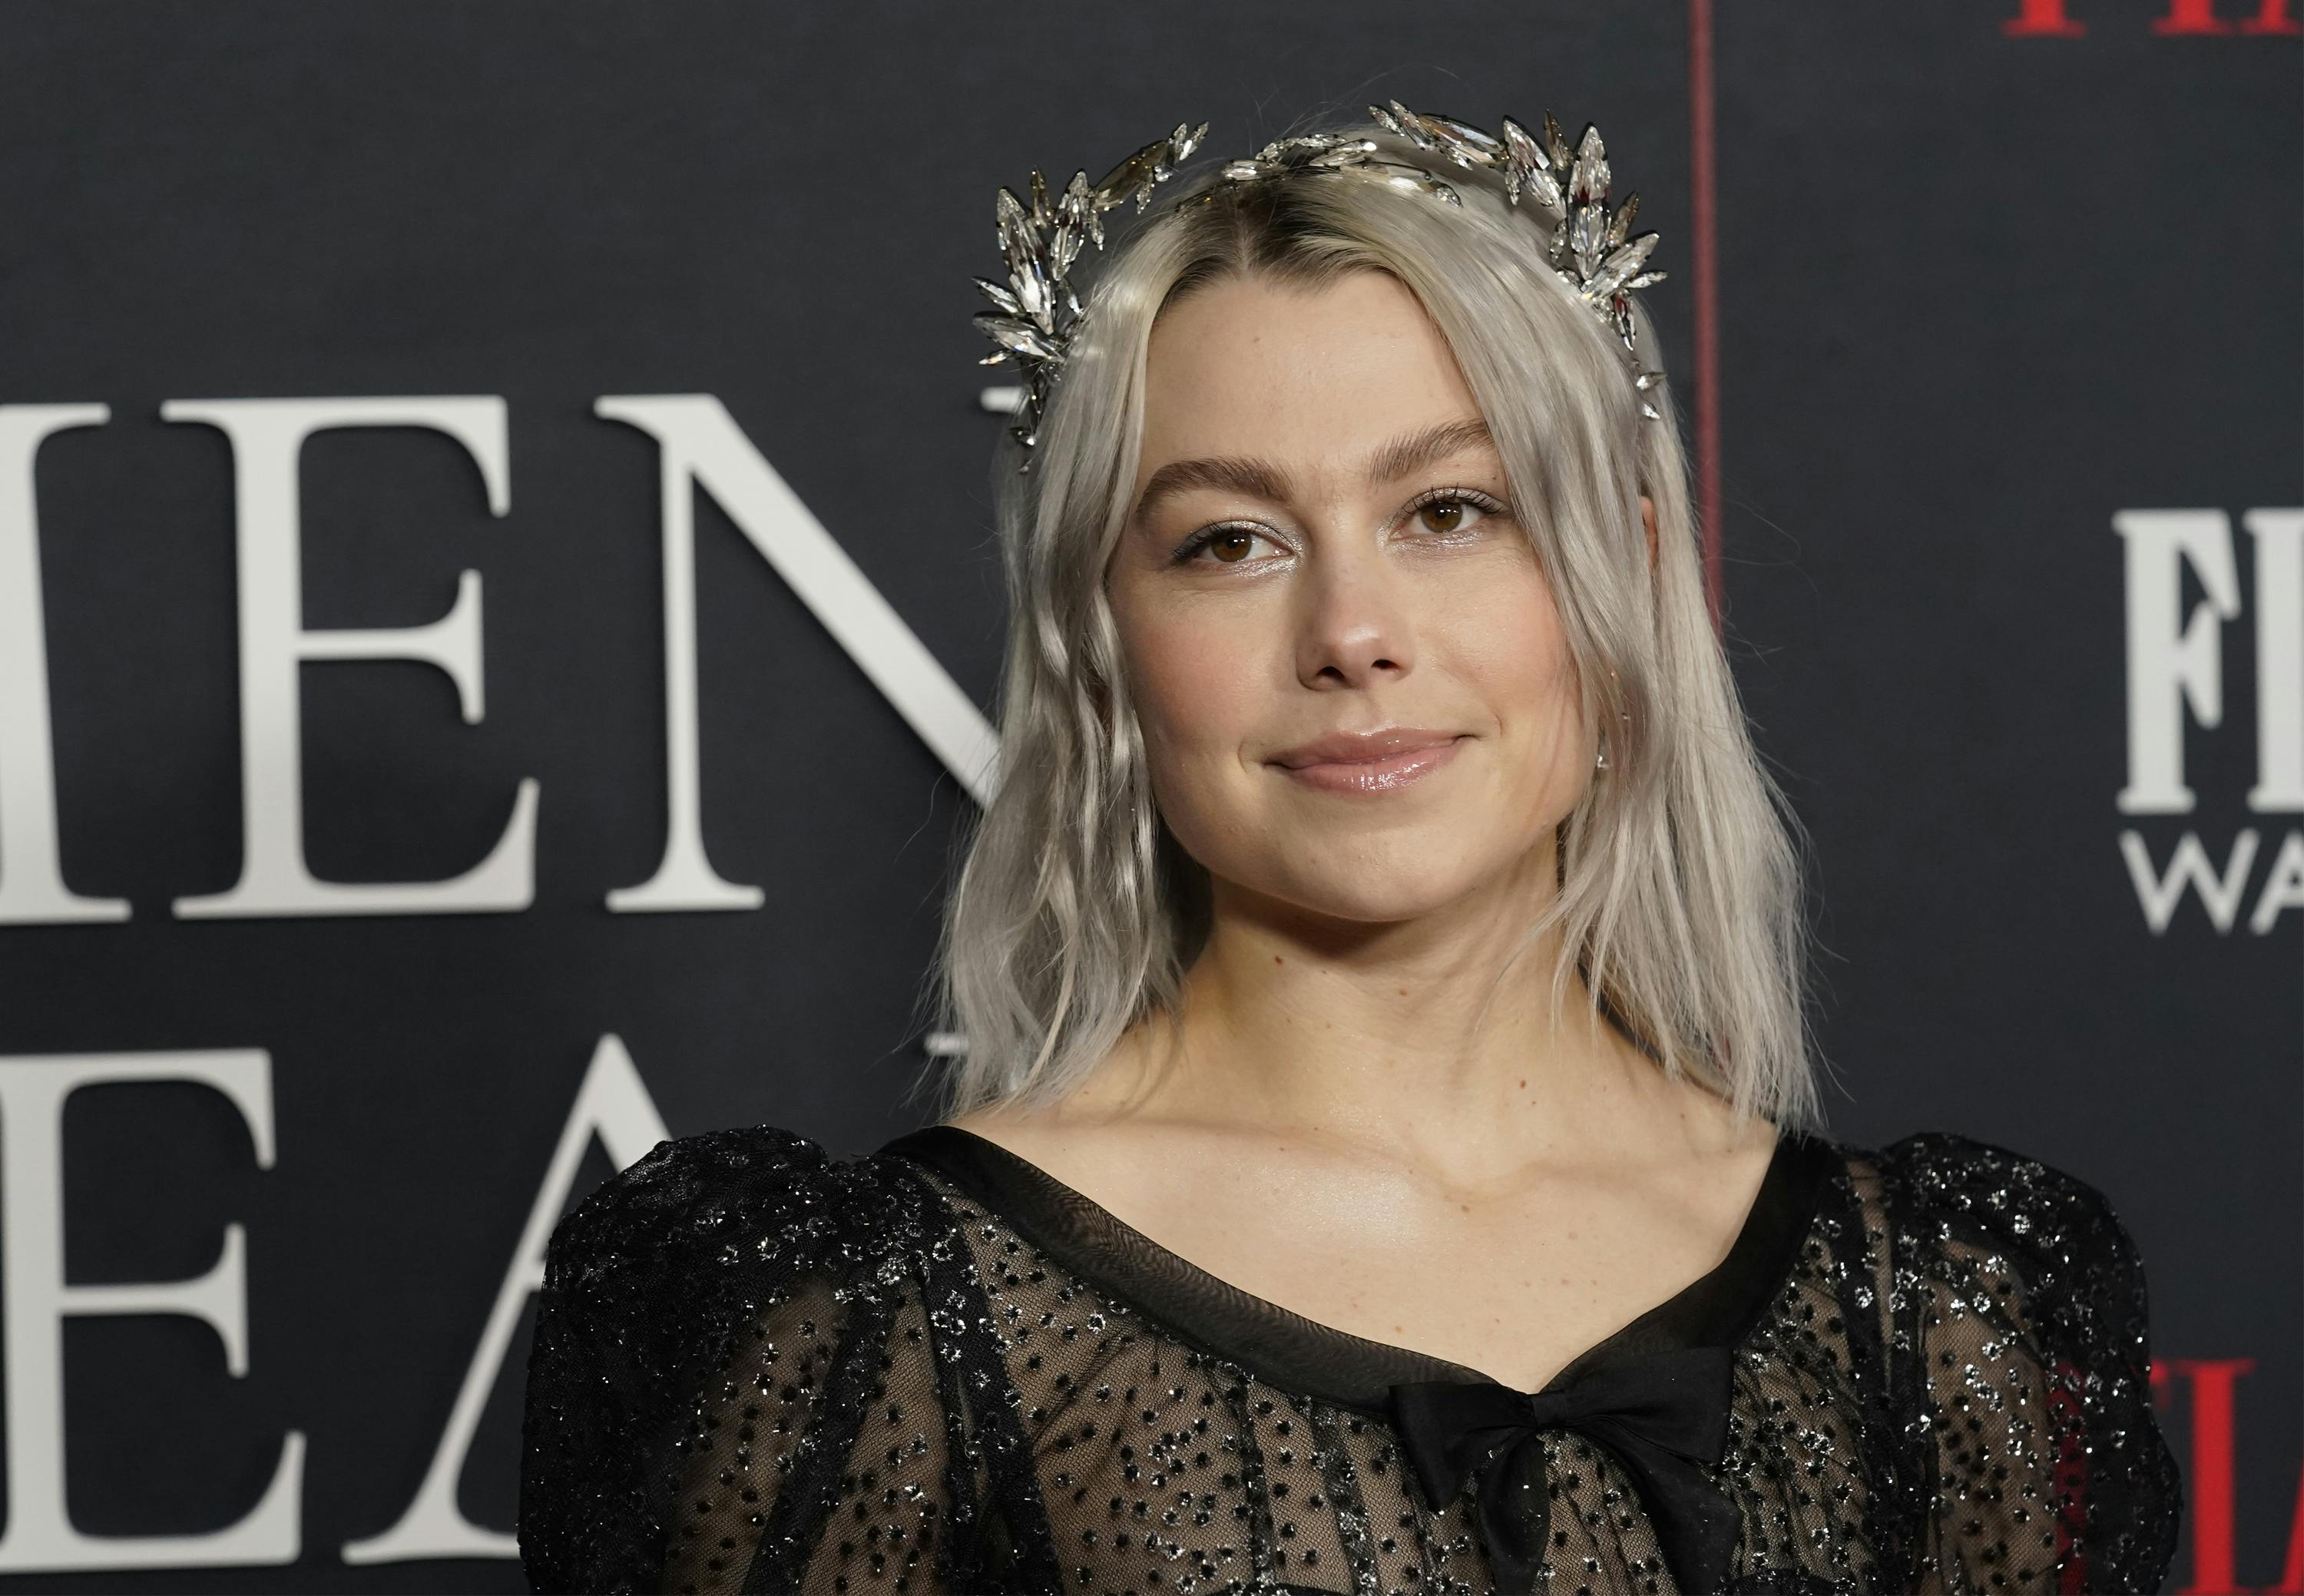 Phoebe Bridgers arrives at Time's second annual Women of the Year Gala on Wednesday, March 8, 2023, at the Four Seasons Hotel in Los Angeles. (AP Photo/Chris Pizzello)